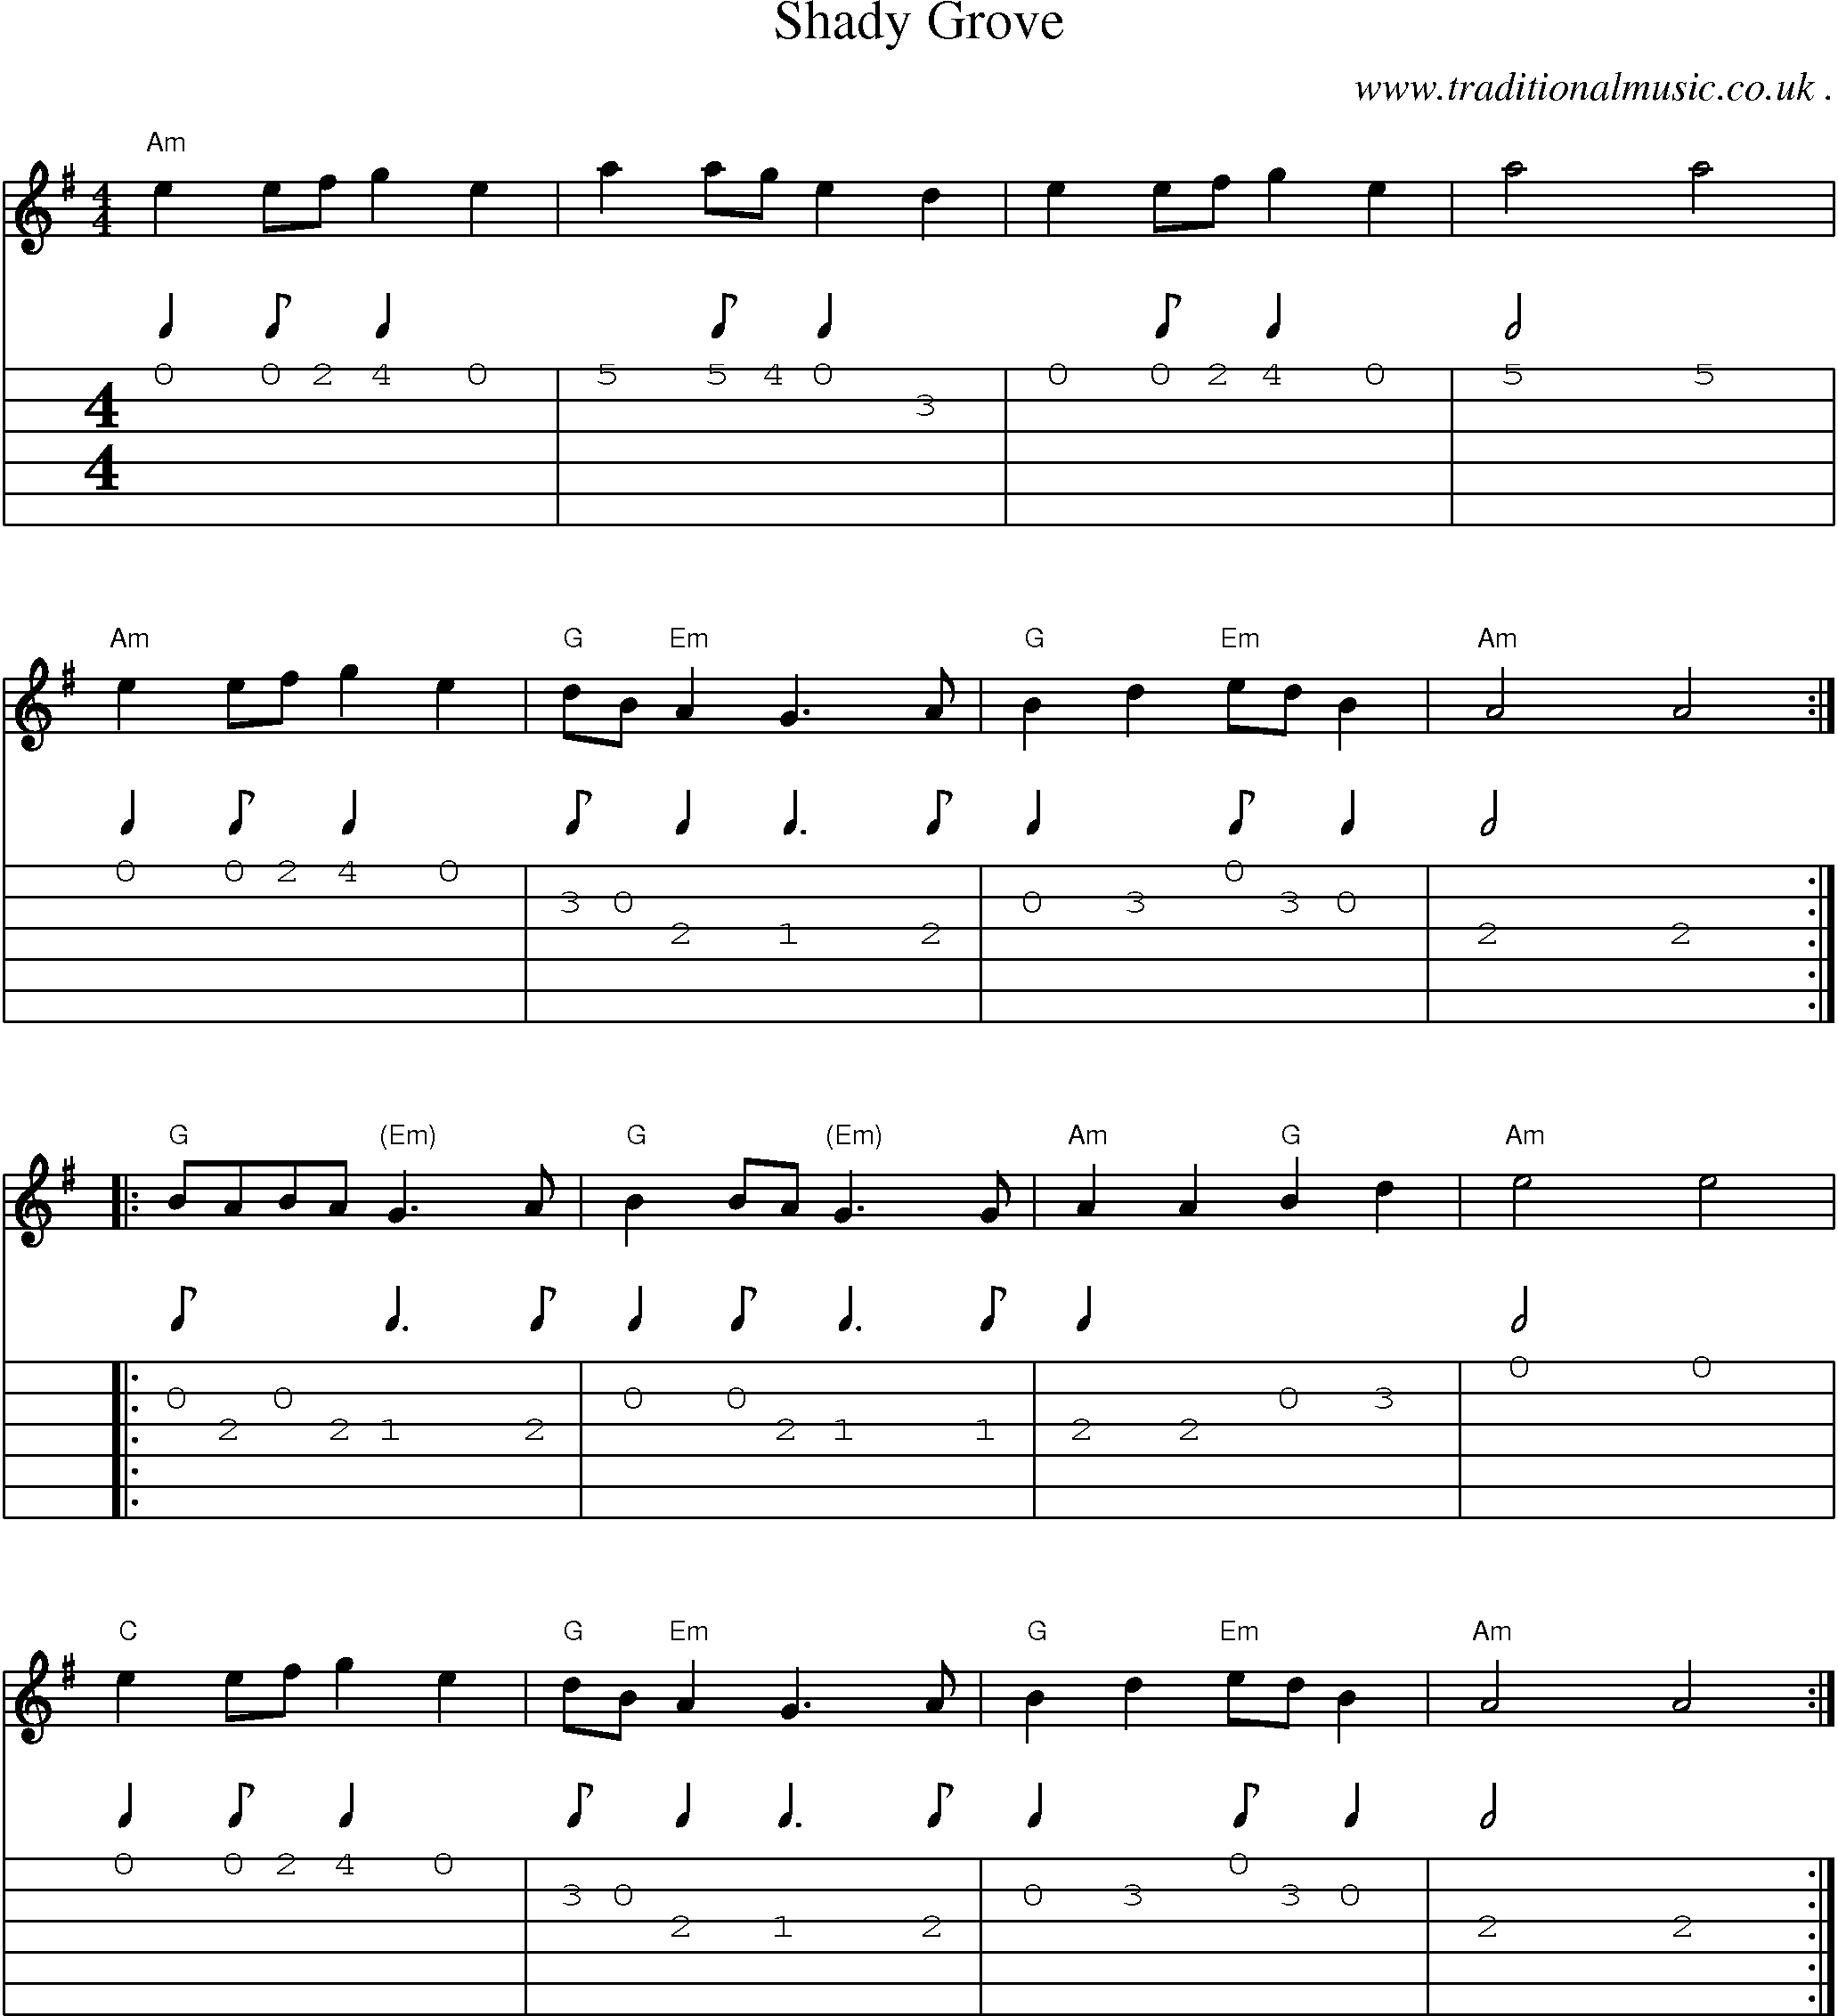 Music Score and Guitar Tabs for Shady Grove